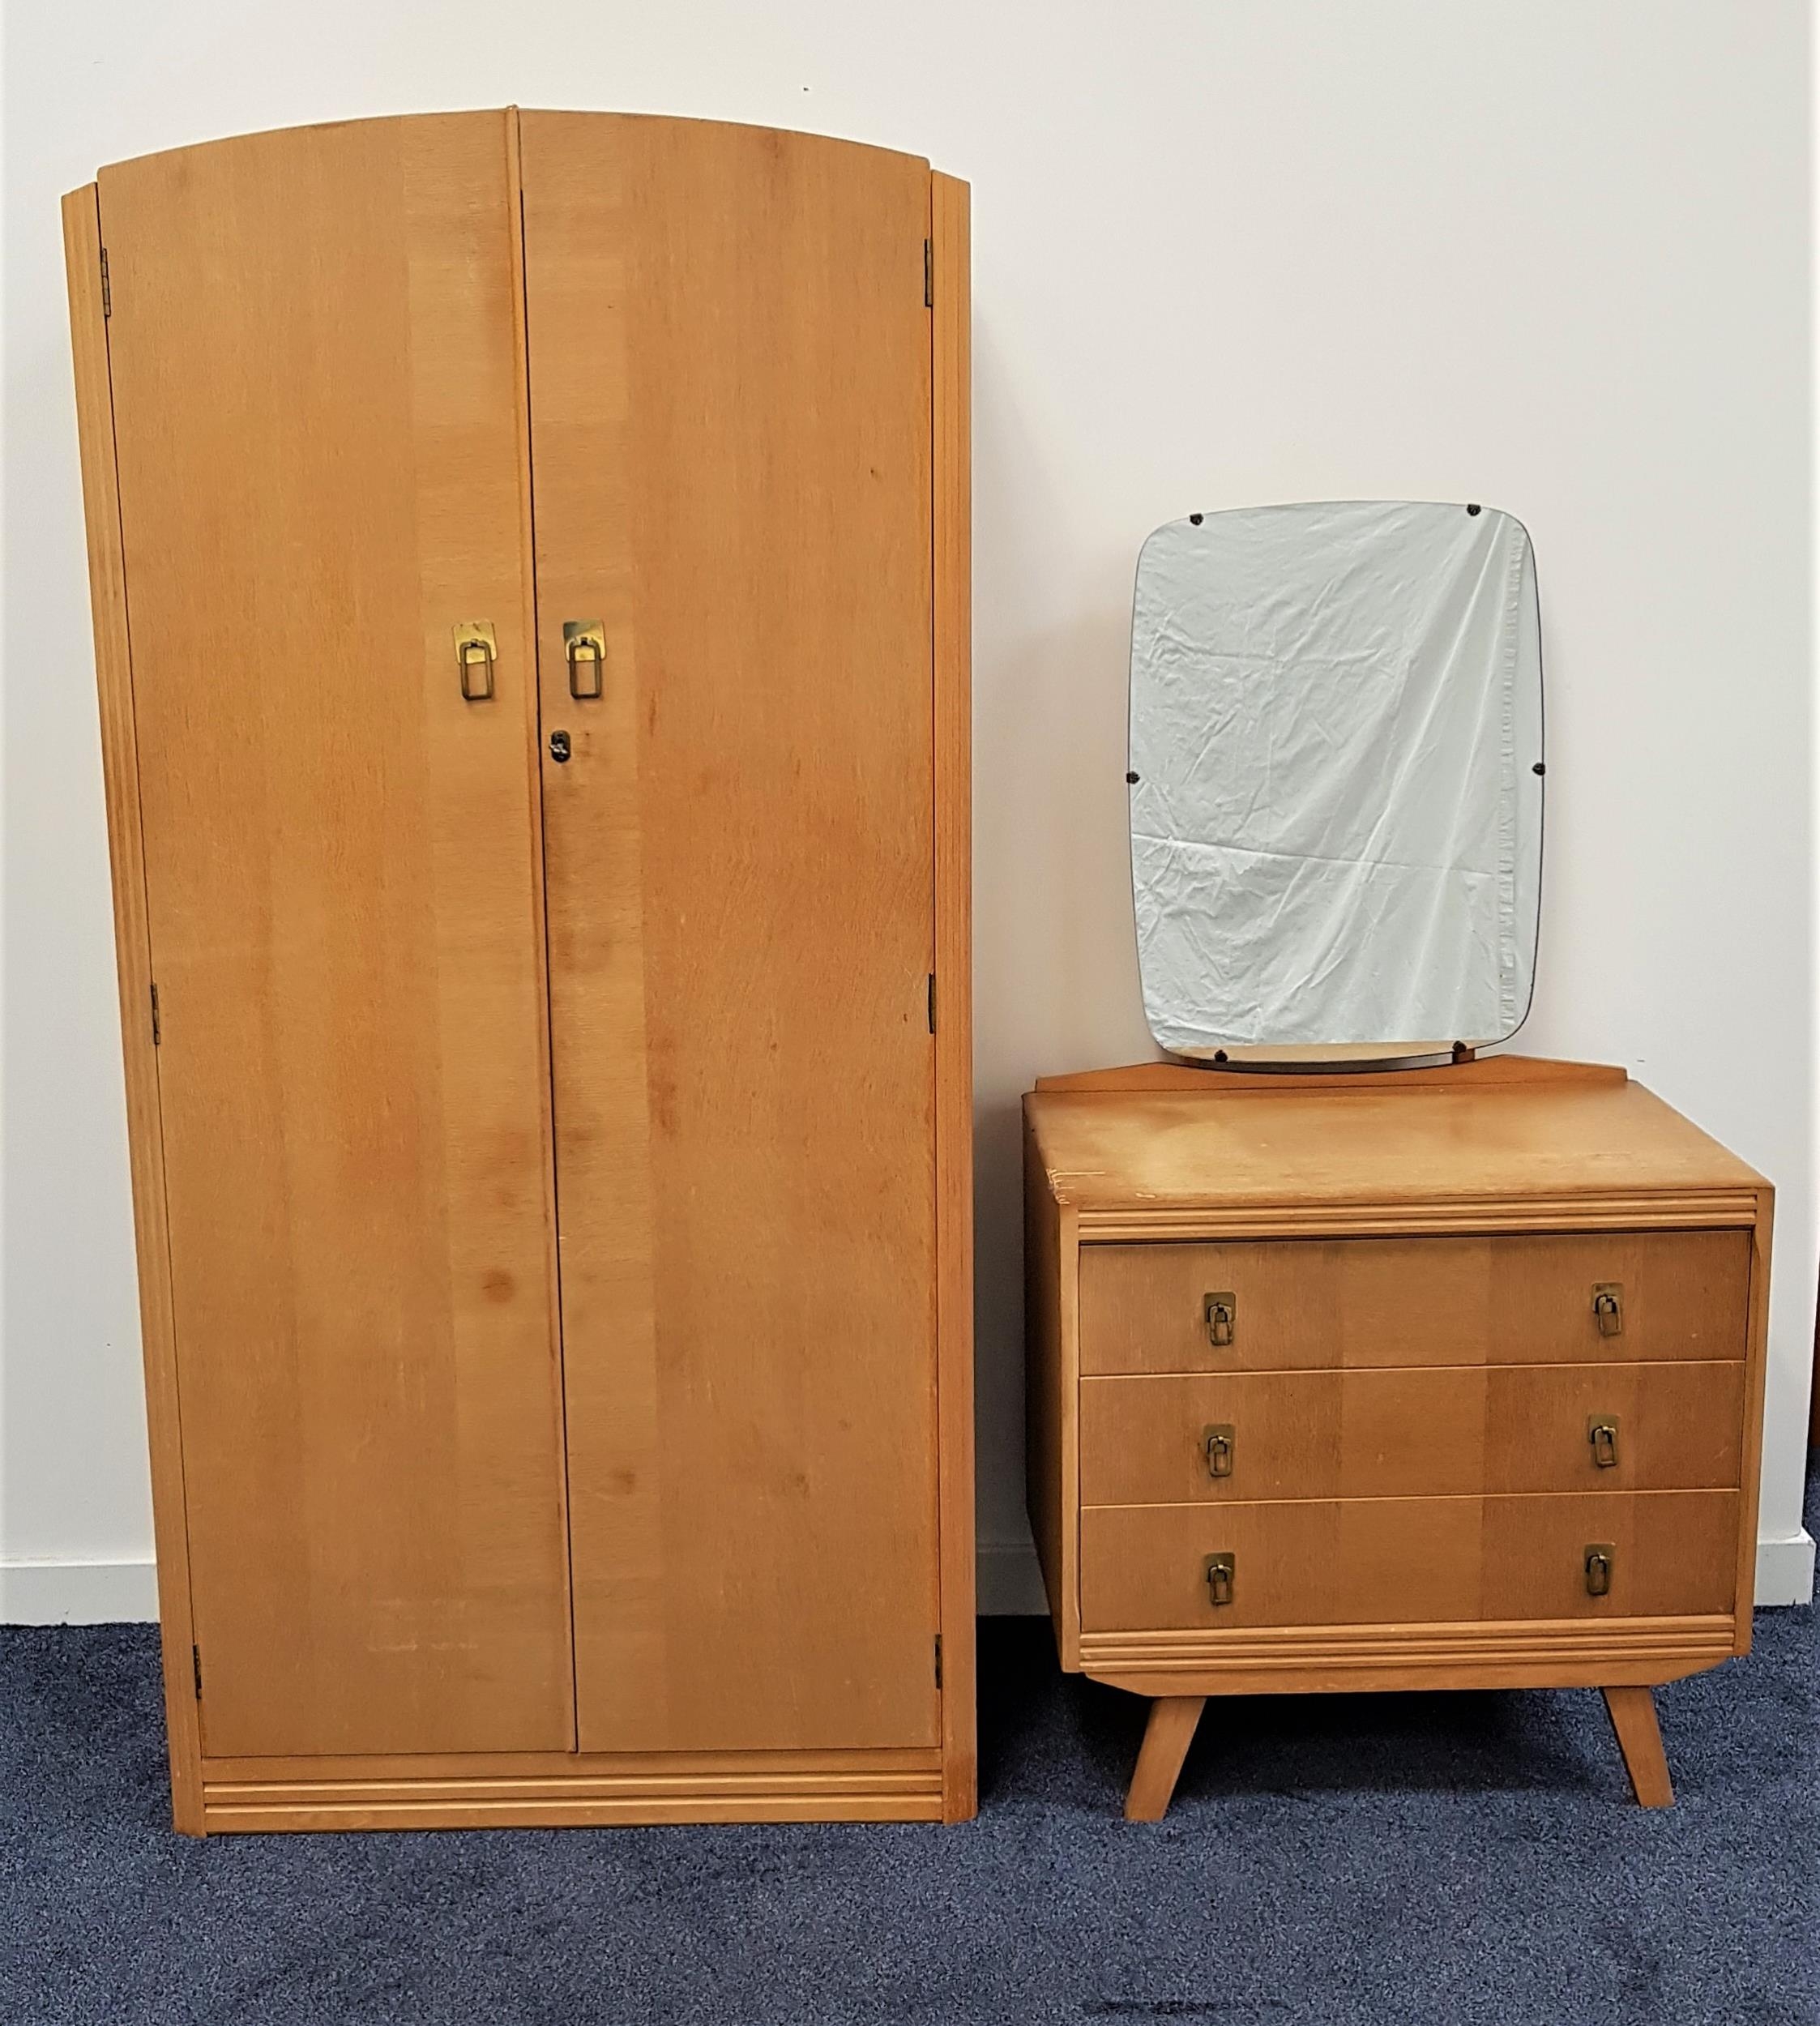 C.W.S. LTD. OAK BEDROOM SUITE comprising a shaped two door wardrobe opening to reveal a mirror,